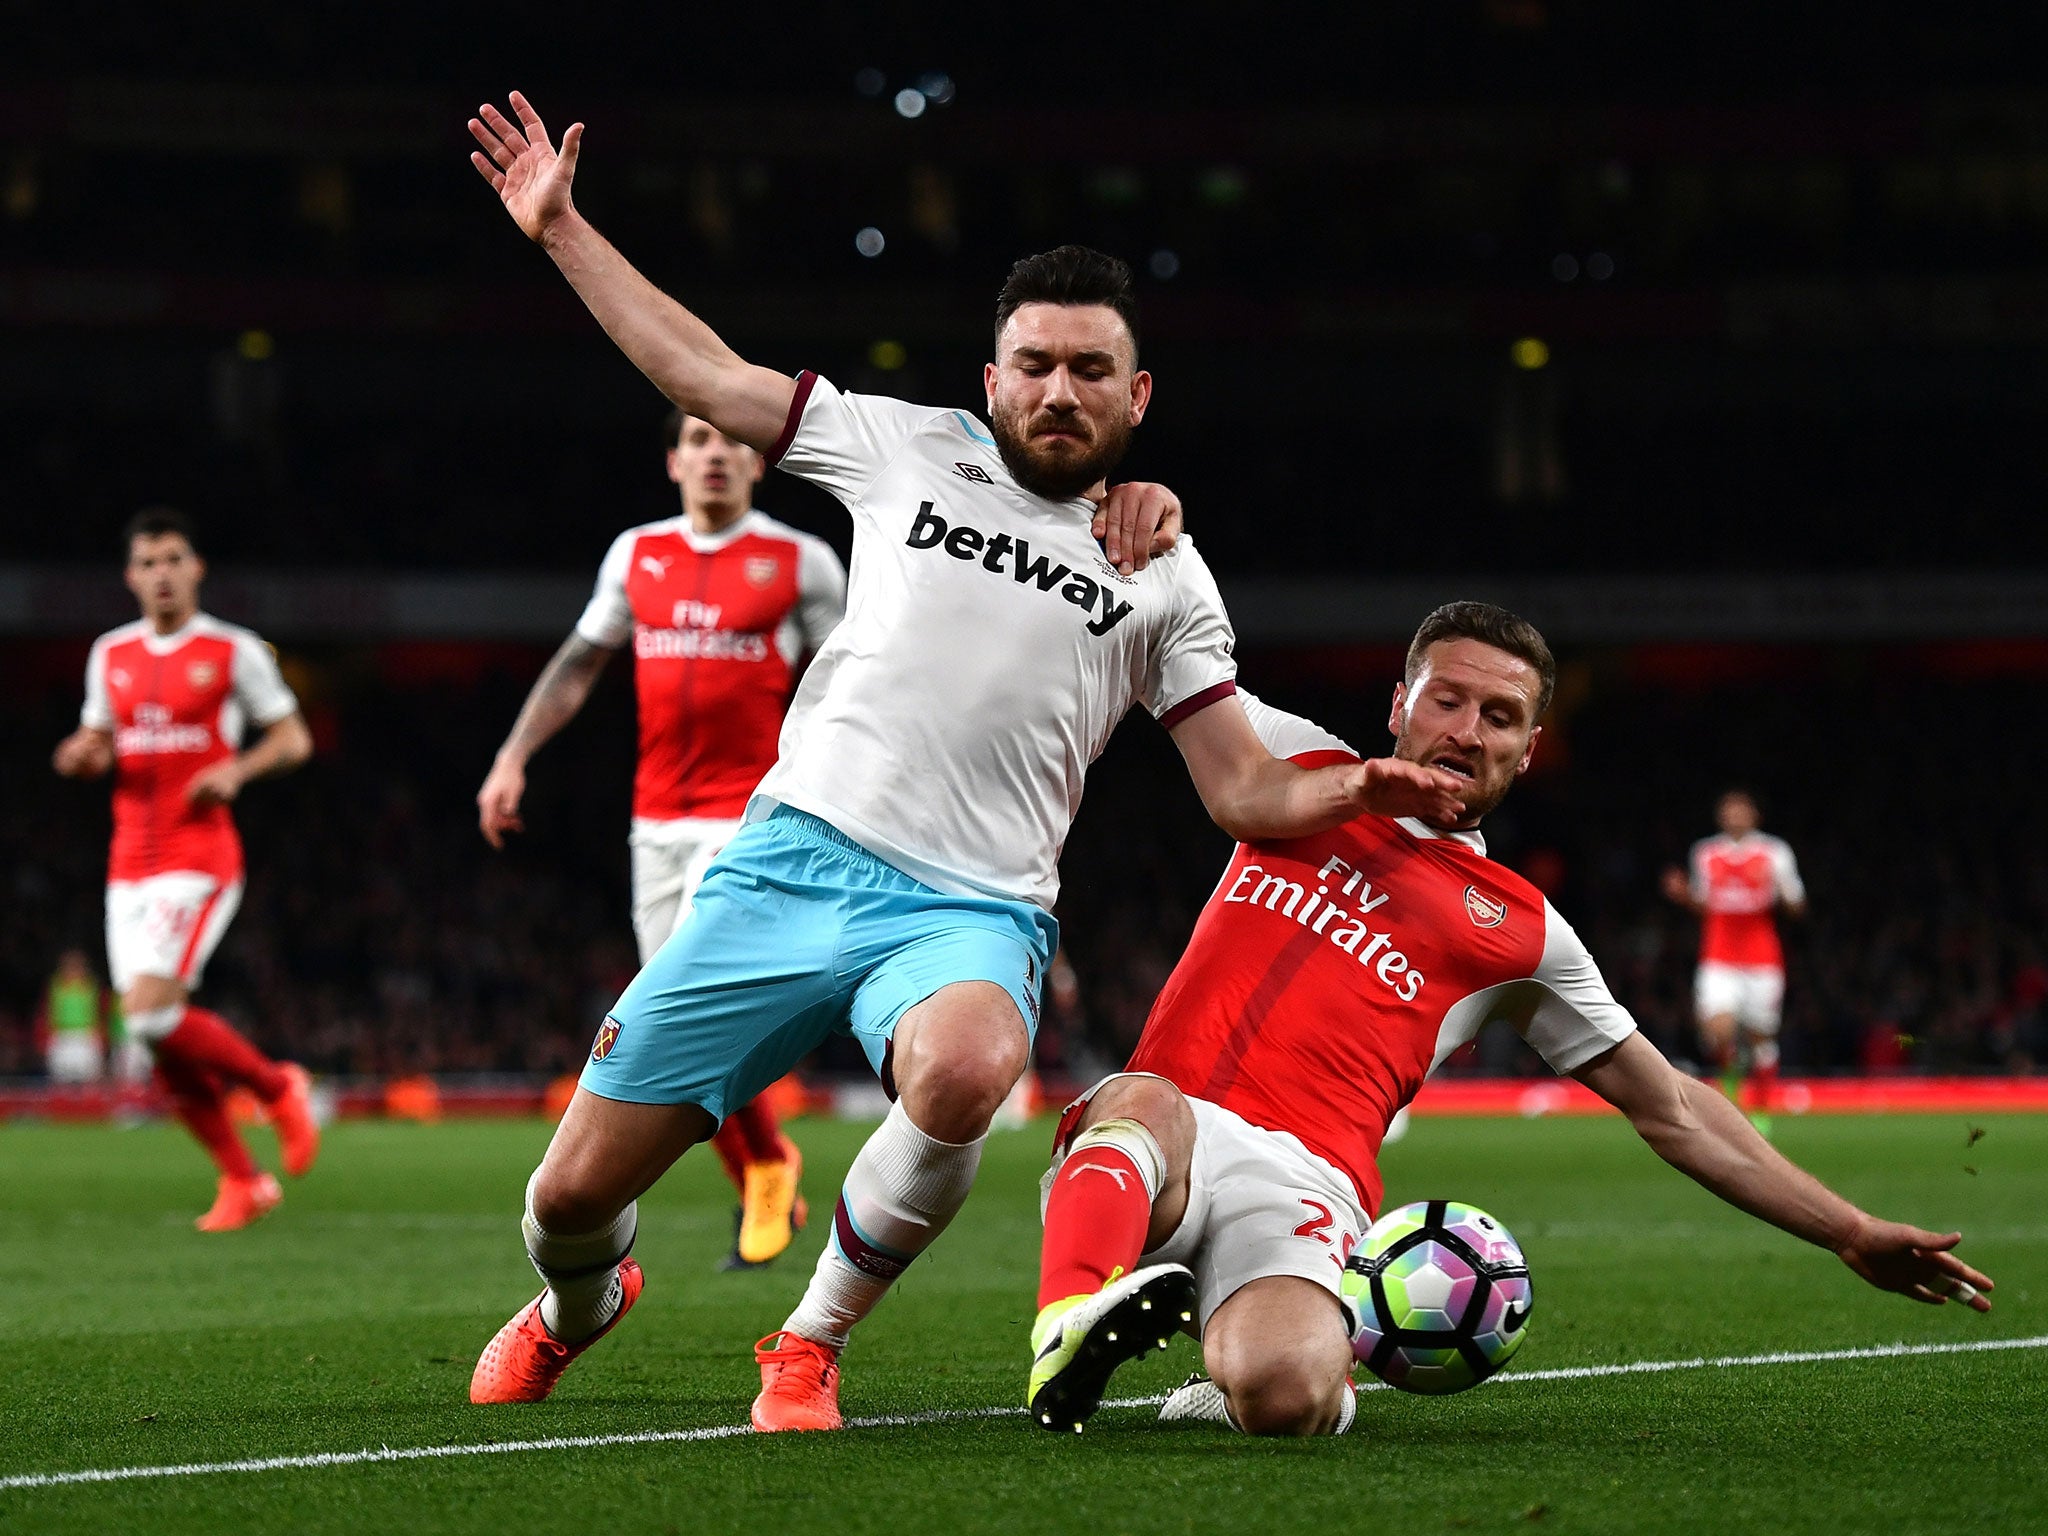 West Ham vs Arsenal live: What time does it start, where can we watch it and what are the odds? | The | Independent